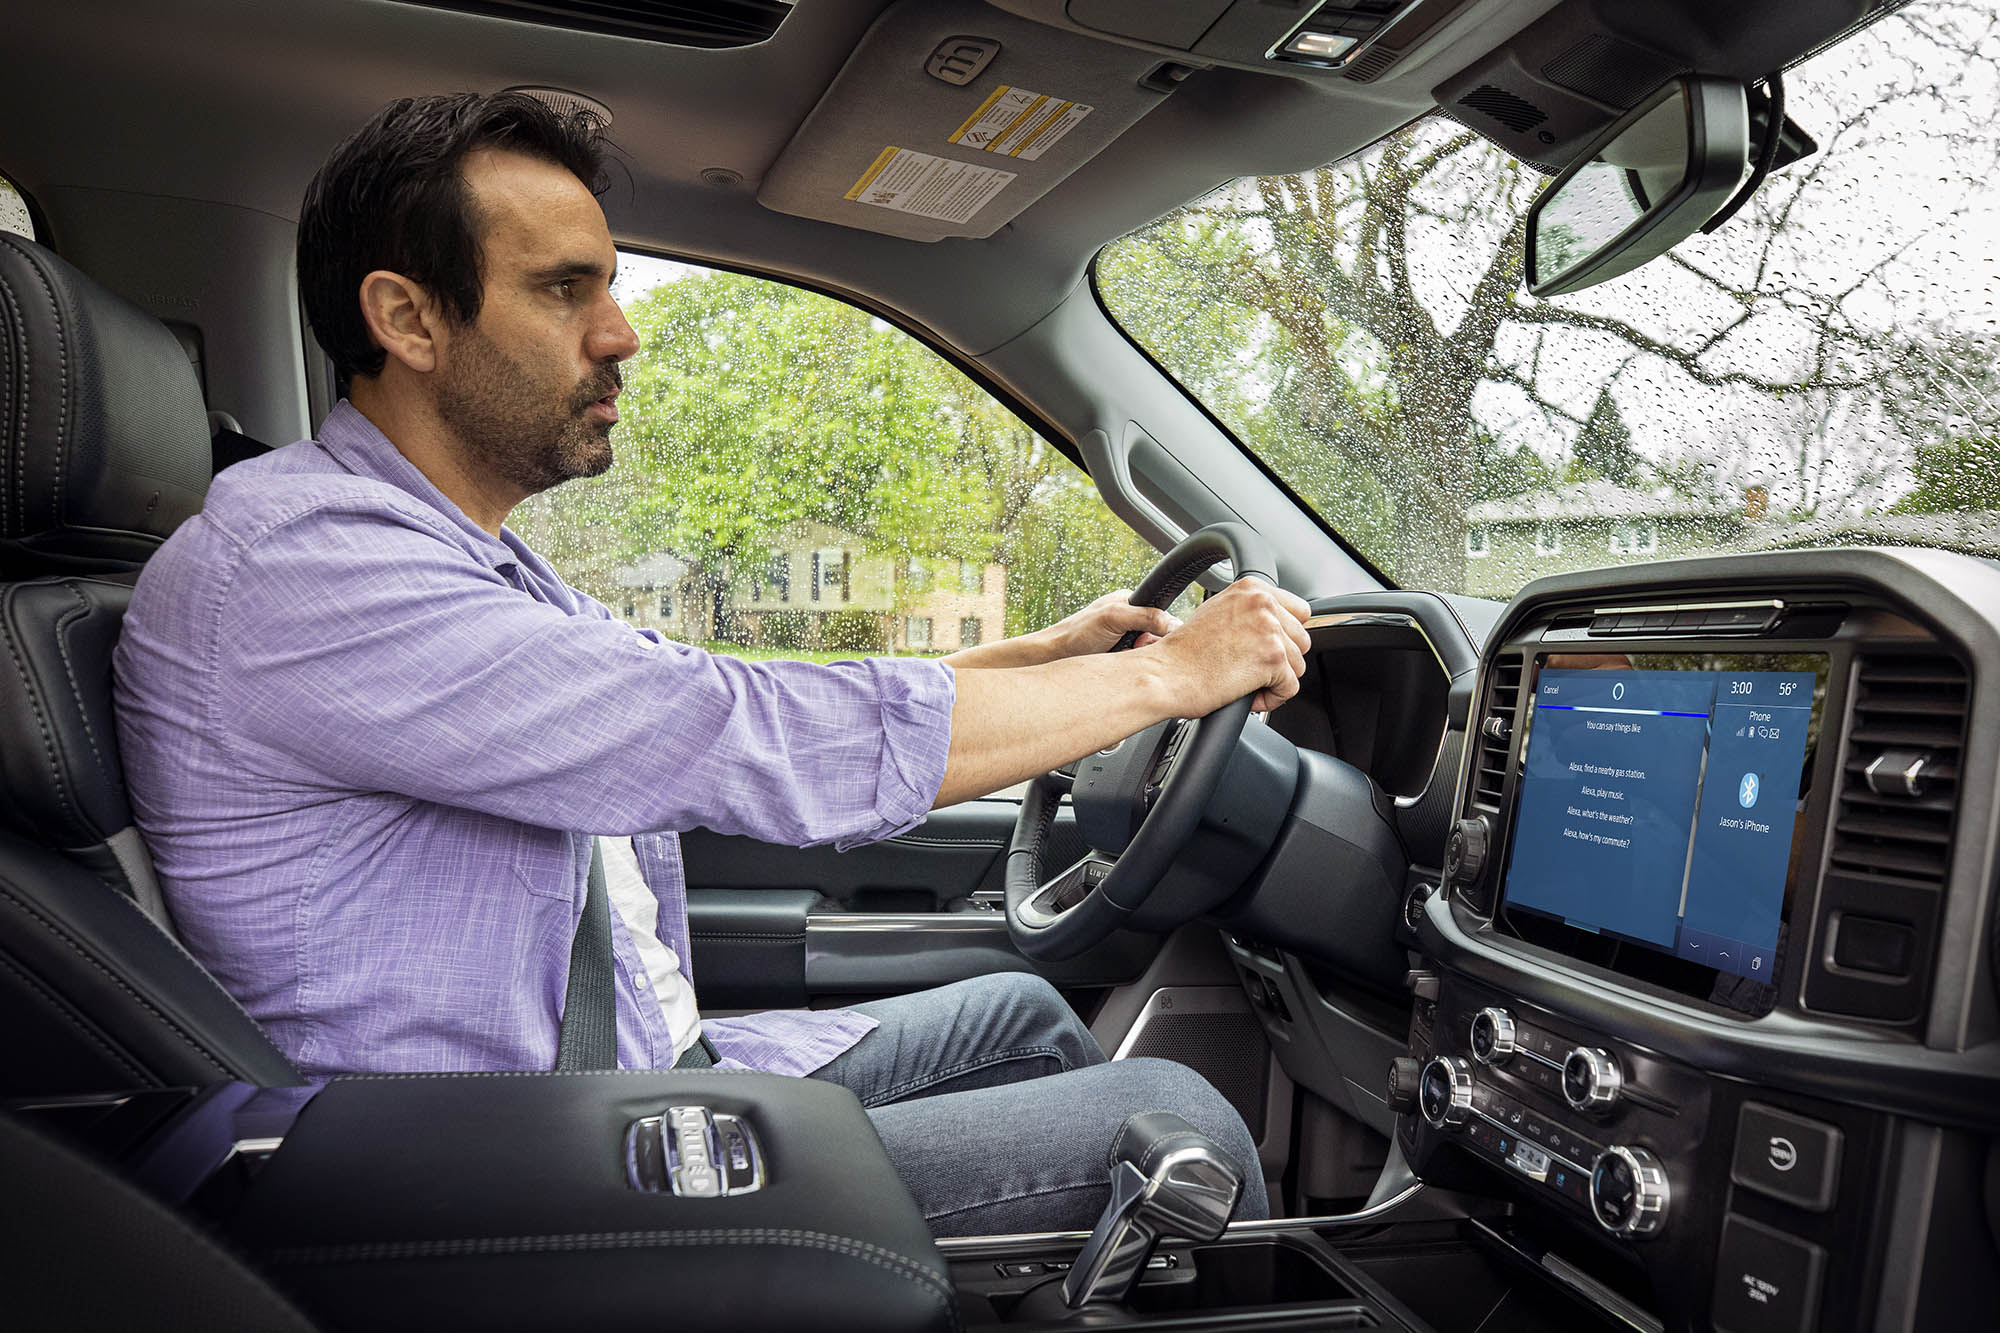 Person drives Ford vehicle with Amazon Alexa Built-in on the infotainment screen.